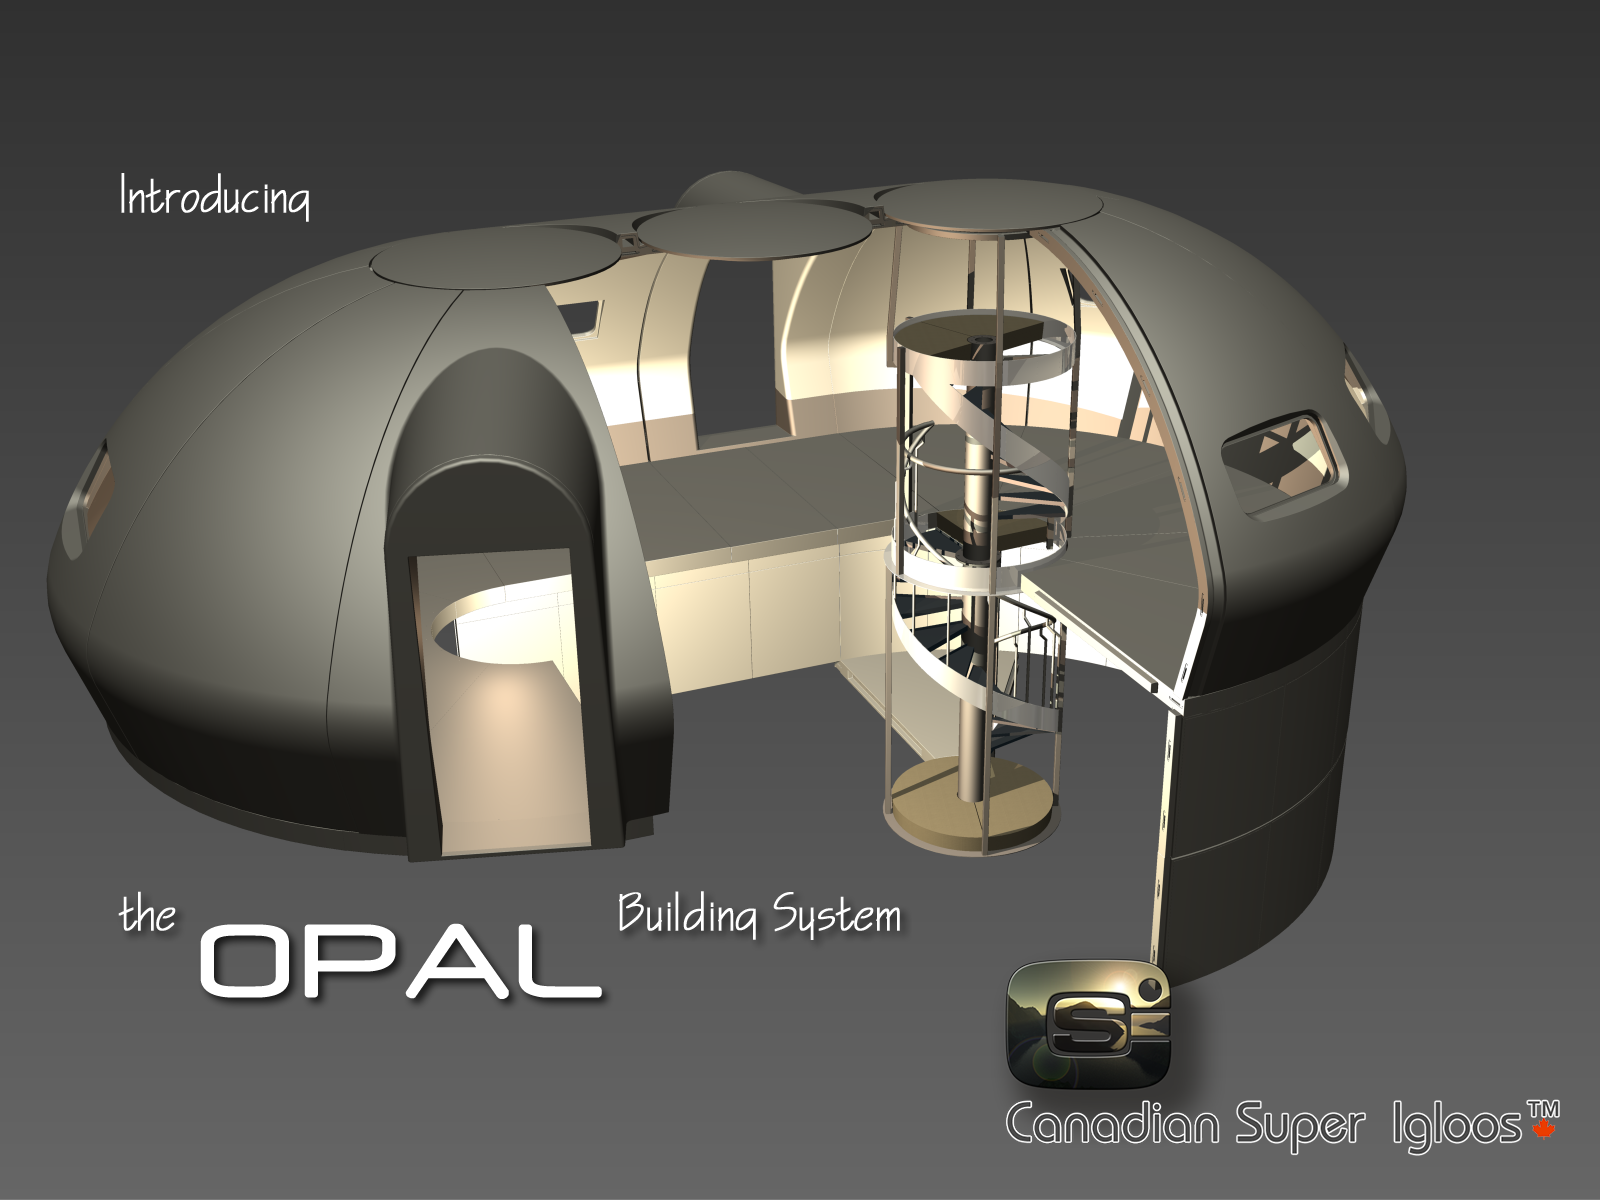 the first public images of the Opal - Modulus?